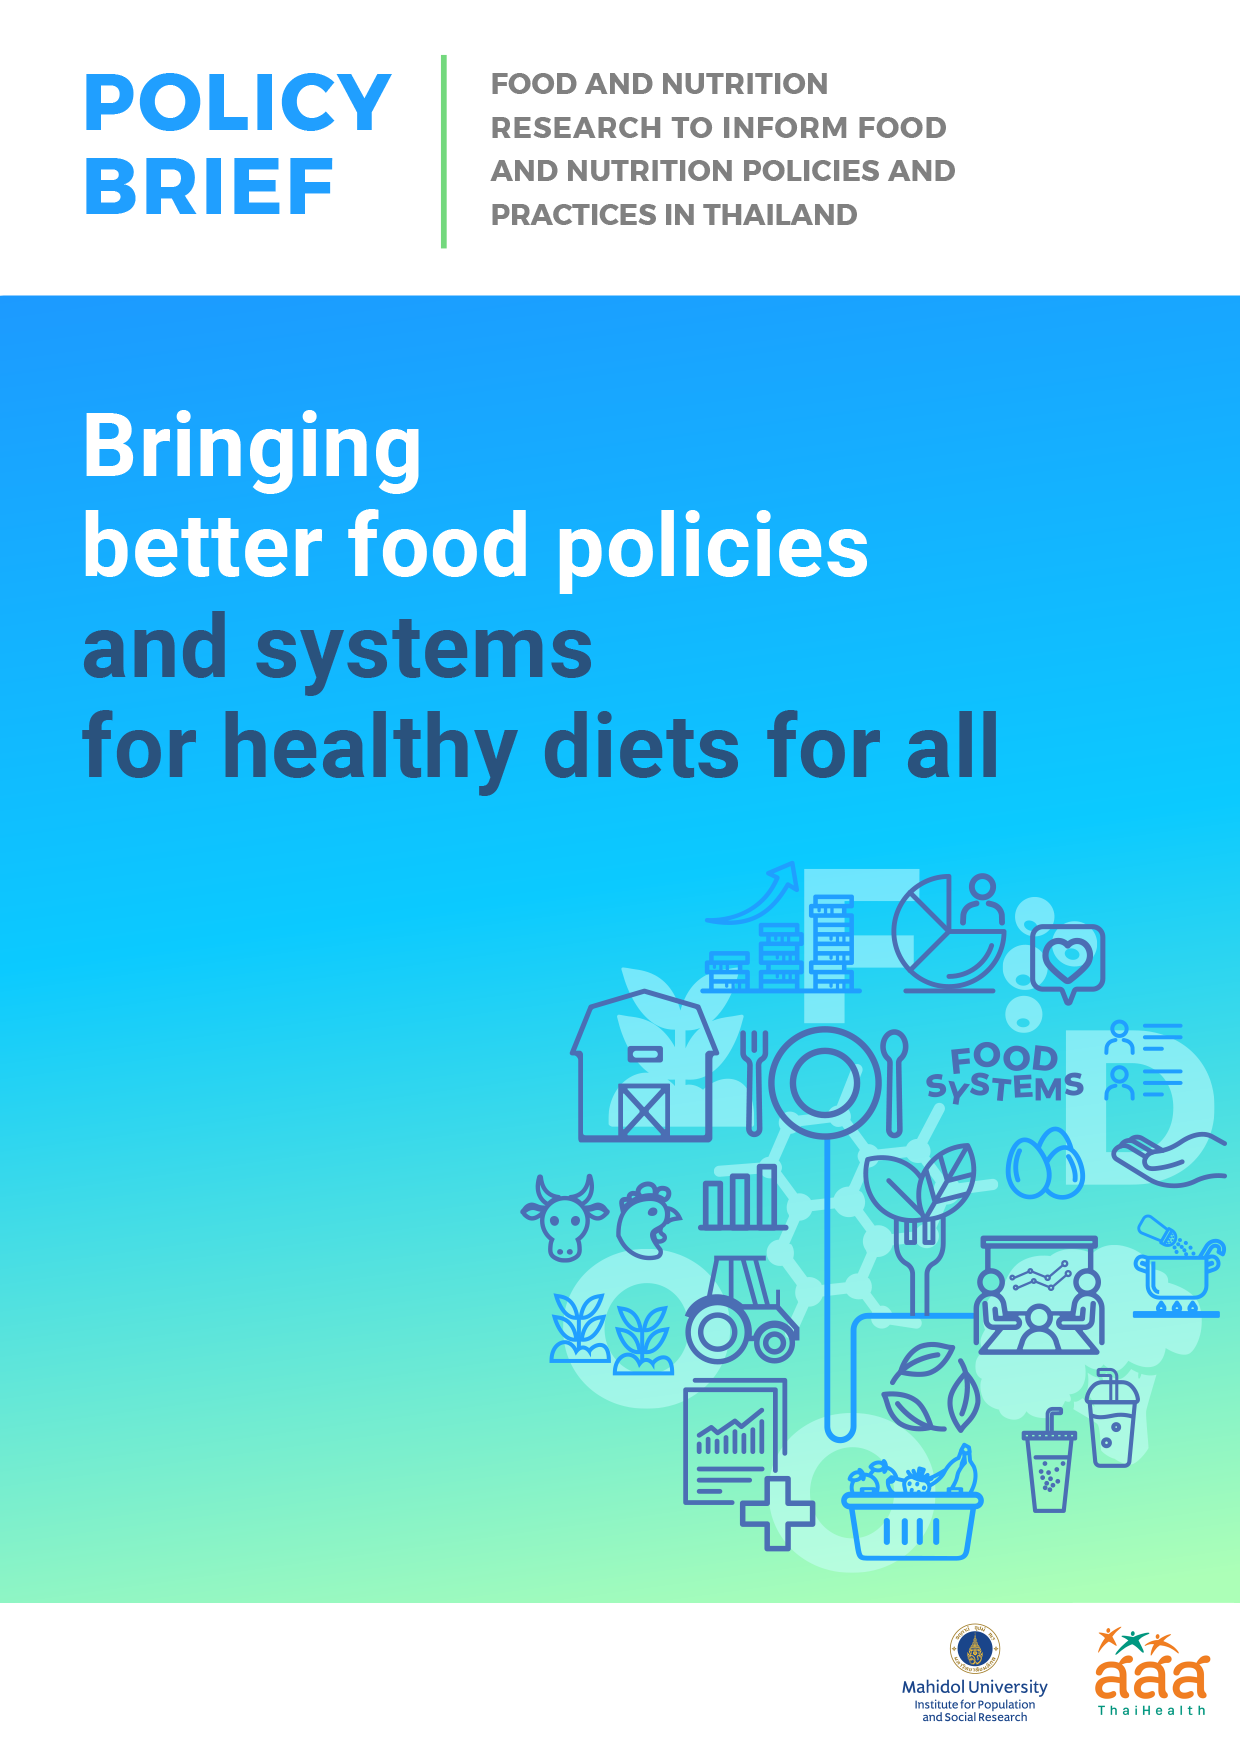 Bringing better food policies and systems for healthy diets for all